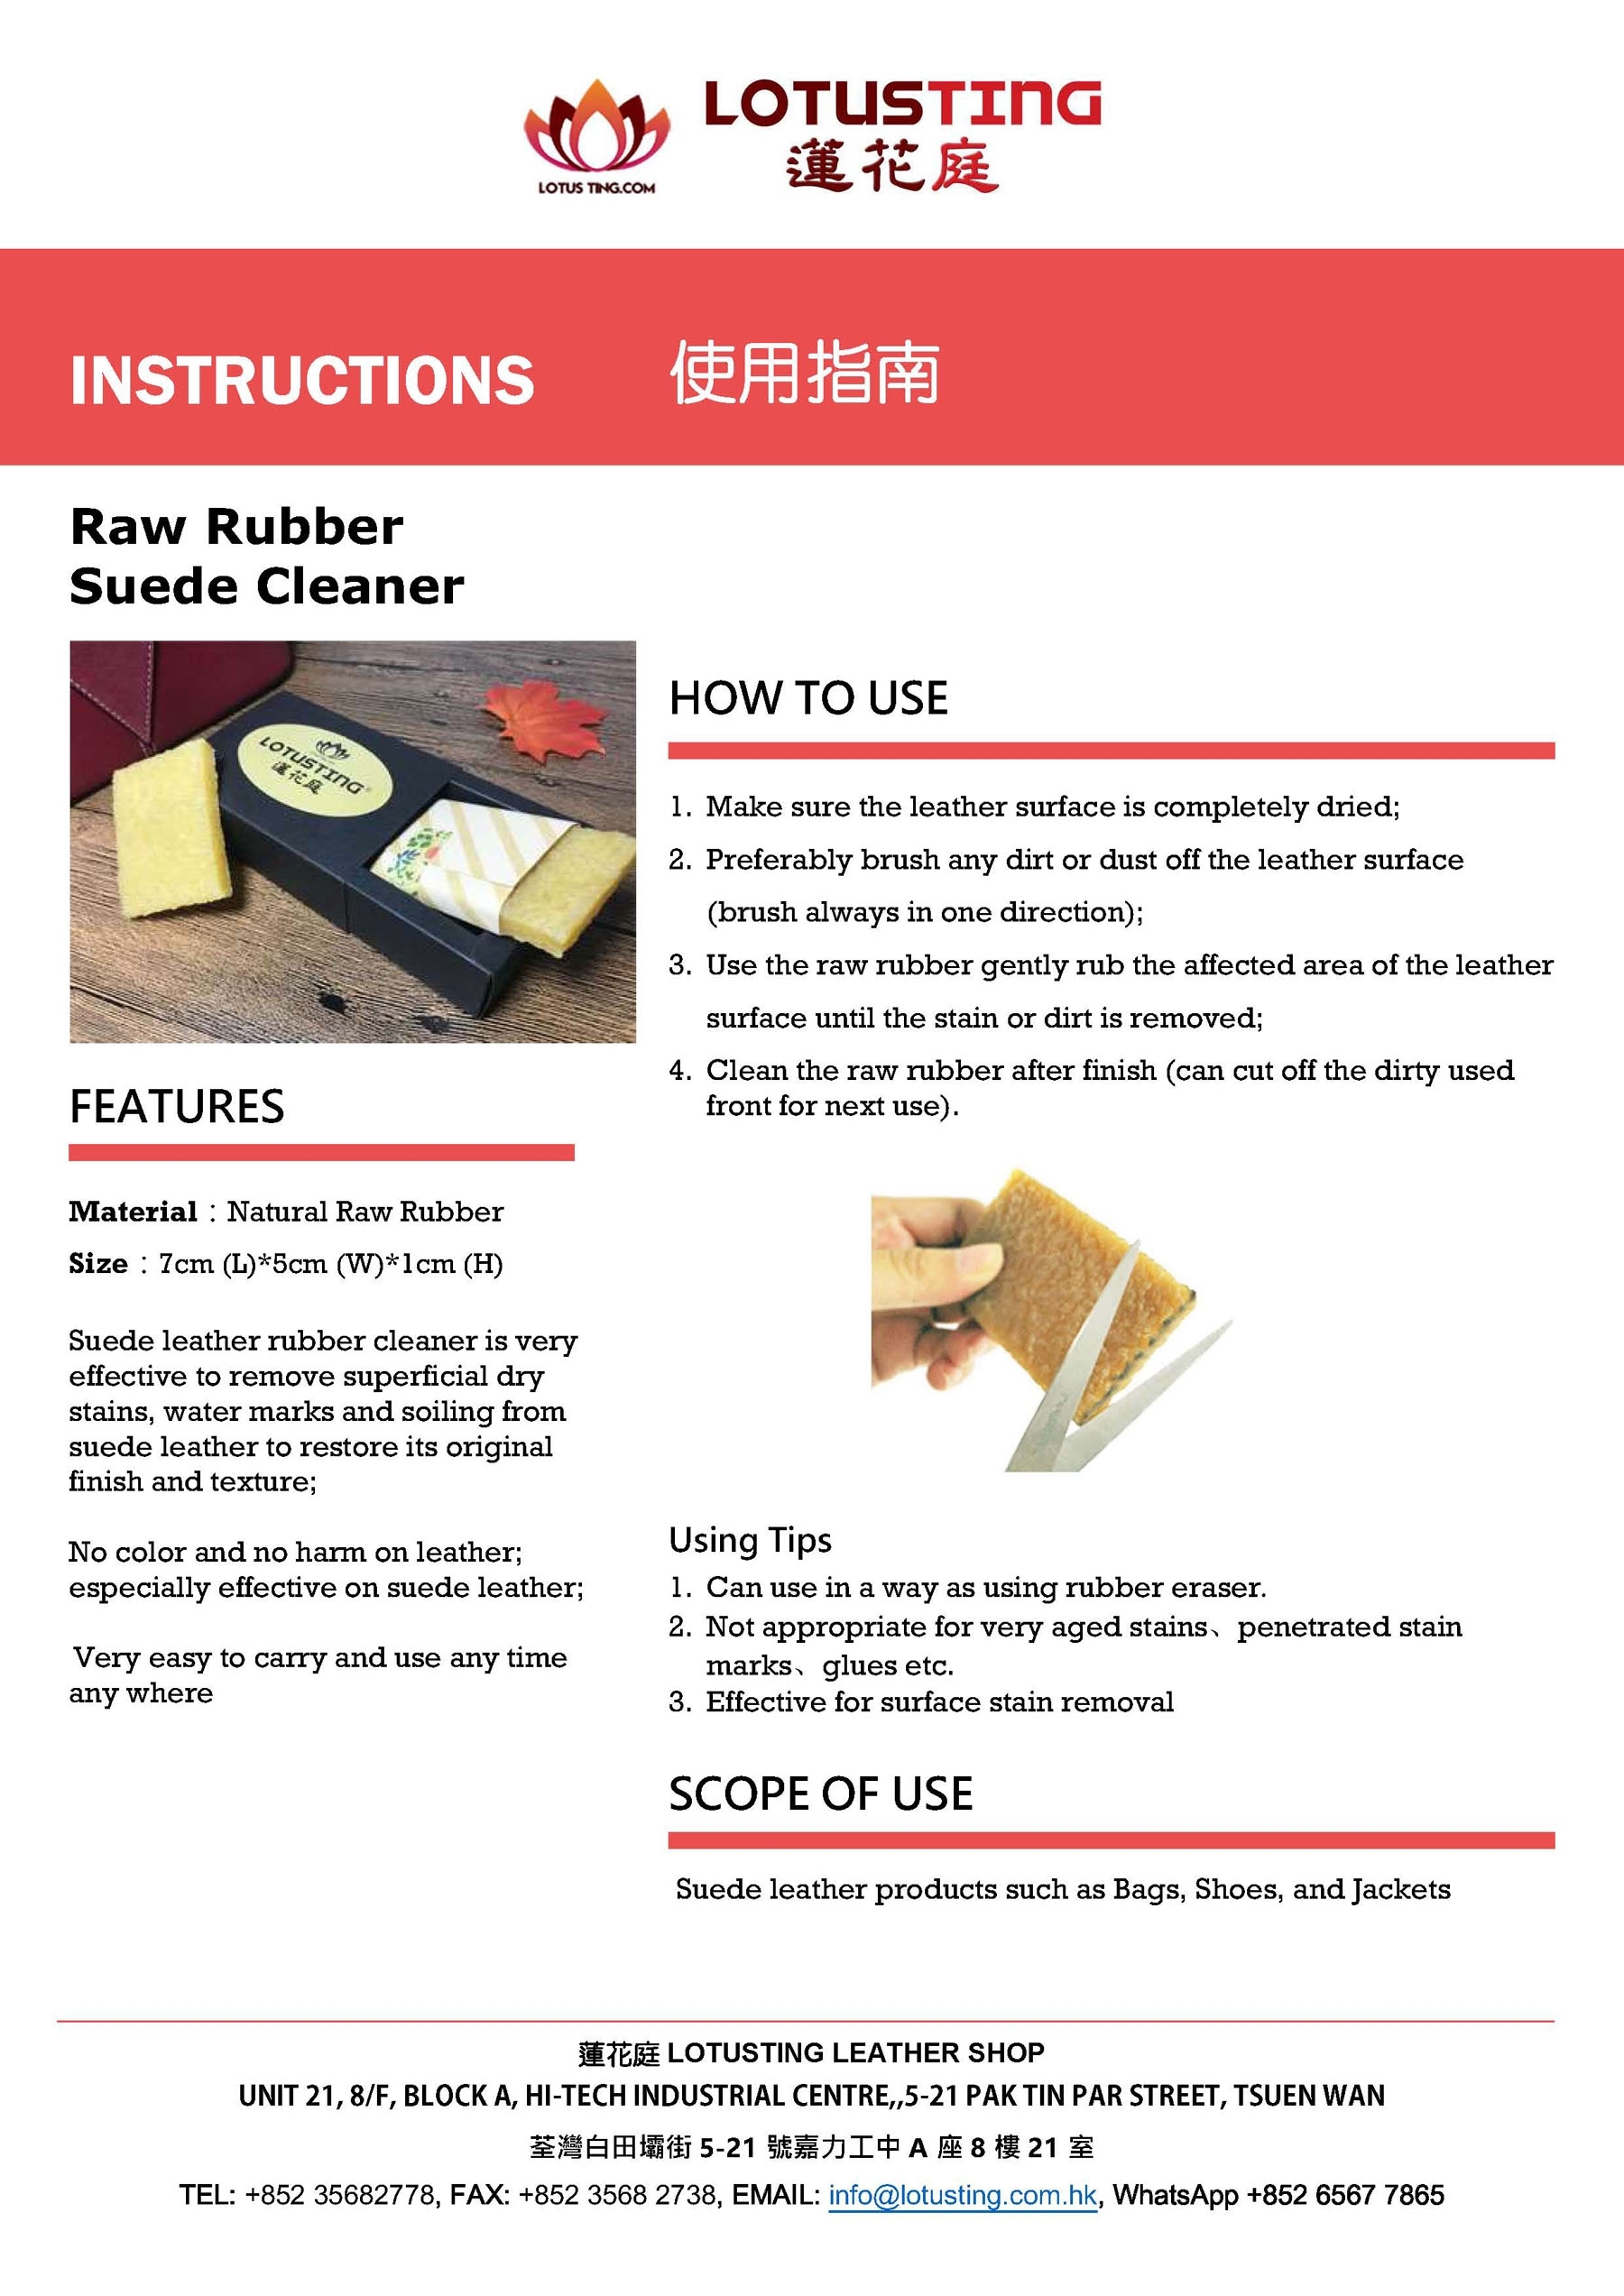 Raw Rubber Instruction in English